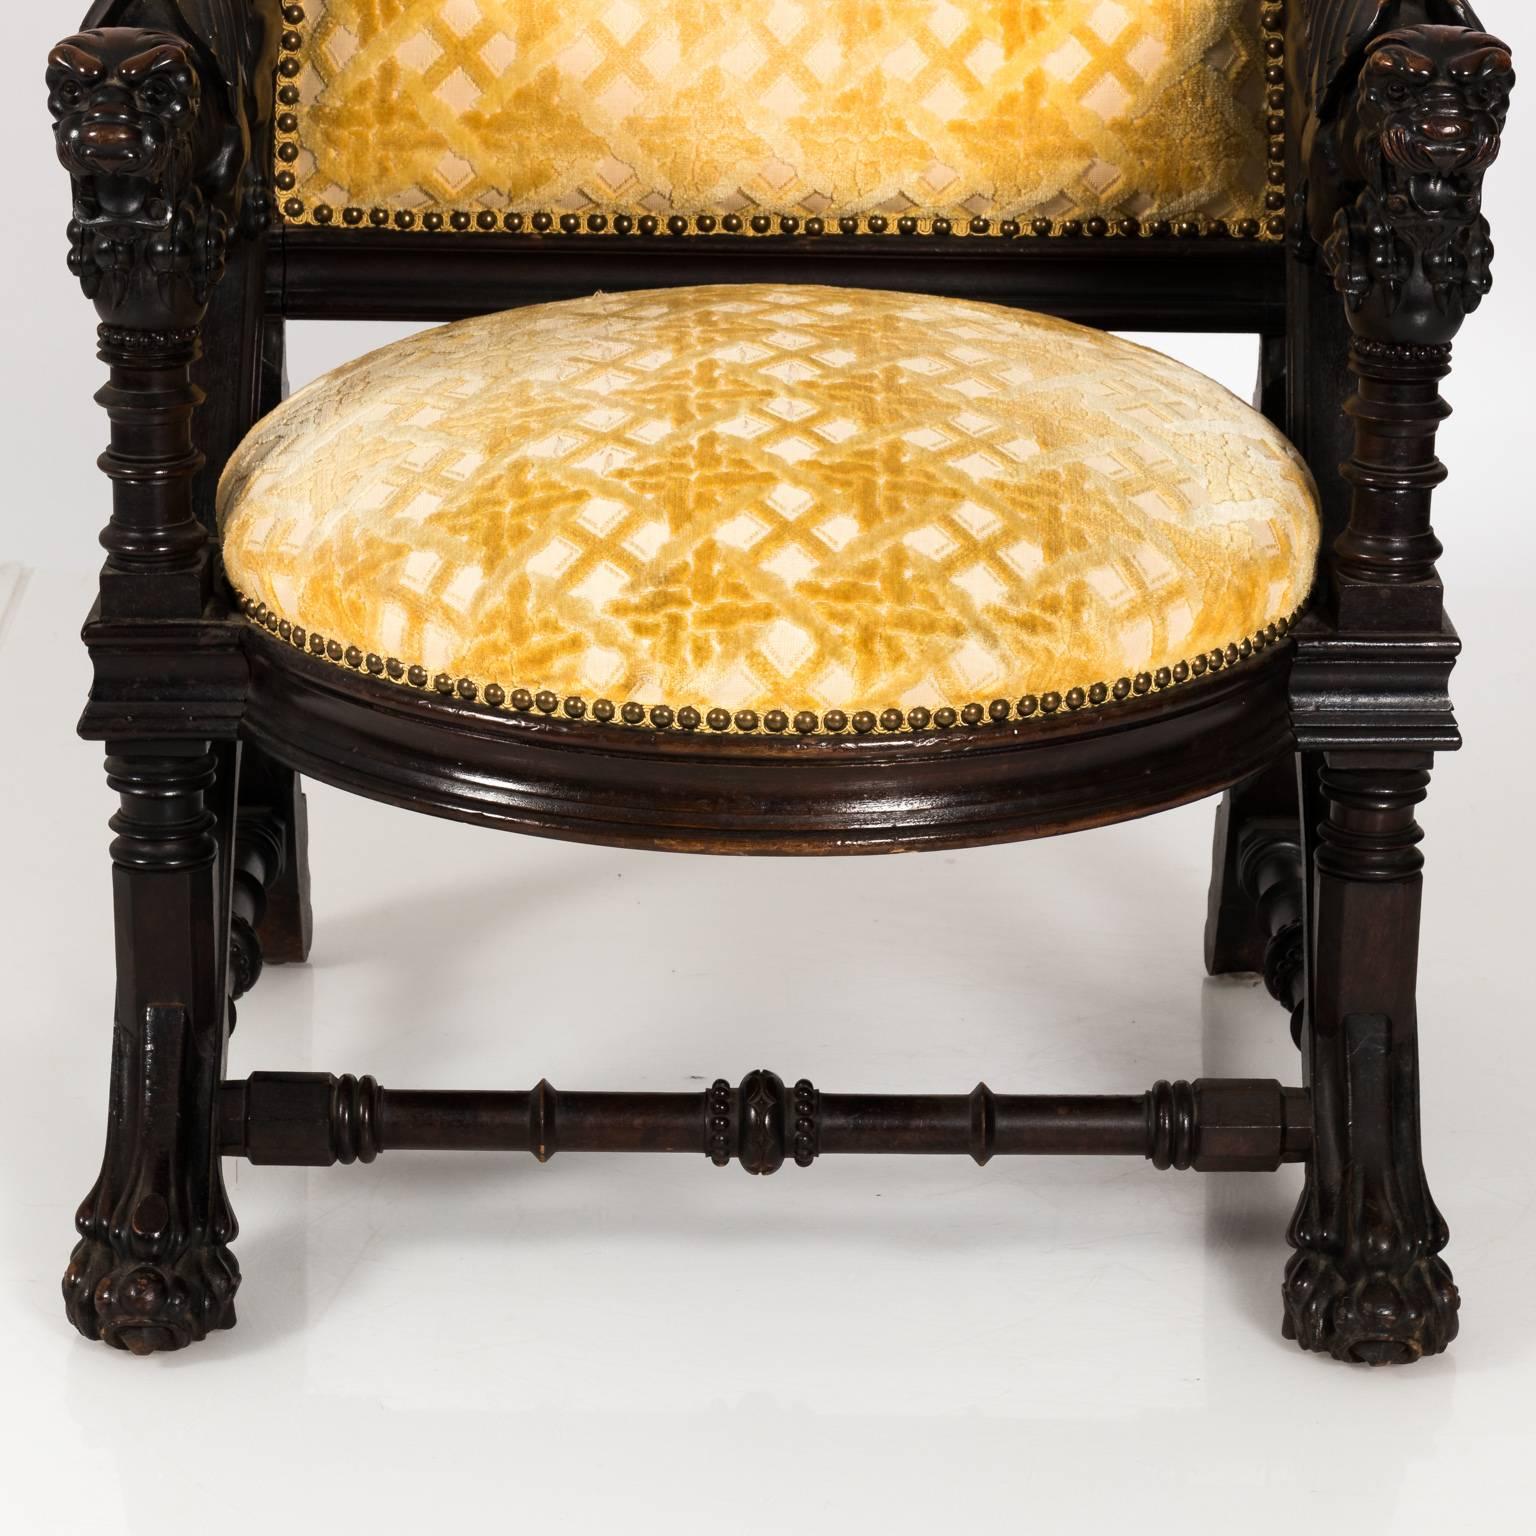 Pair of American Gothic Revival Armchairs by Daniel Pabst, circa 1878 For Sale 7